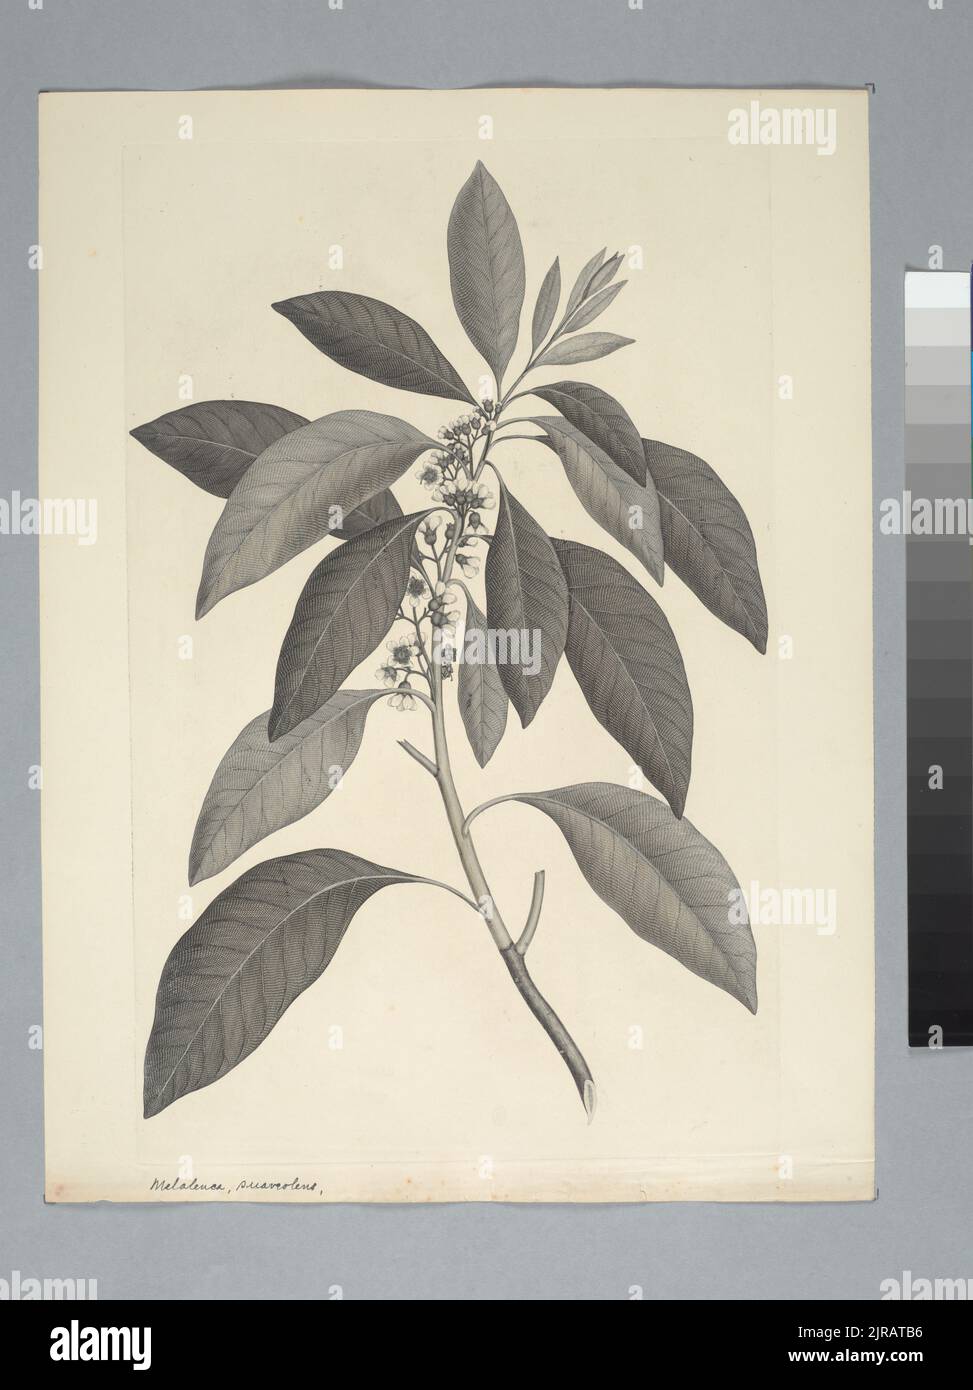 Tristania suaveolens (Solander ex Gaertner) Smith in Rees, by Sydney Parkinson. Gift of the British Museum, 1895. Stock Photo